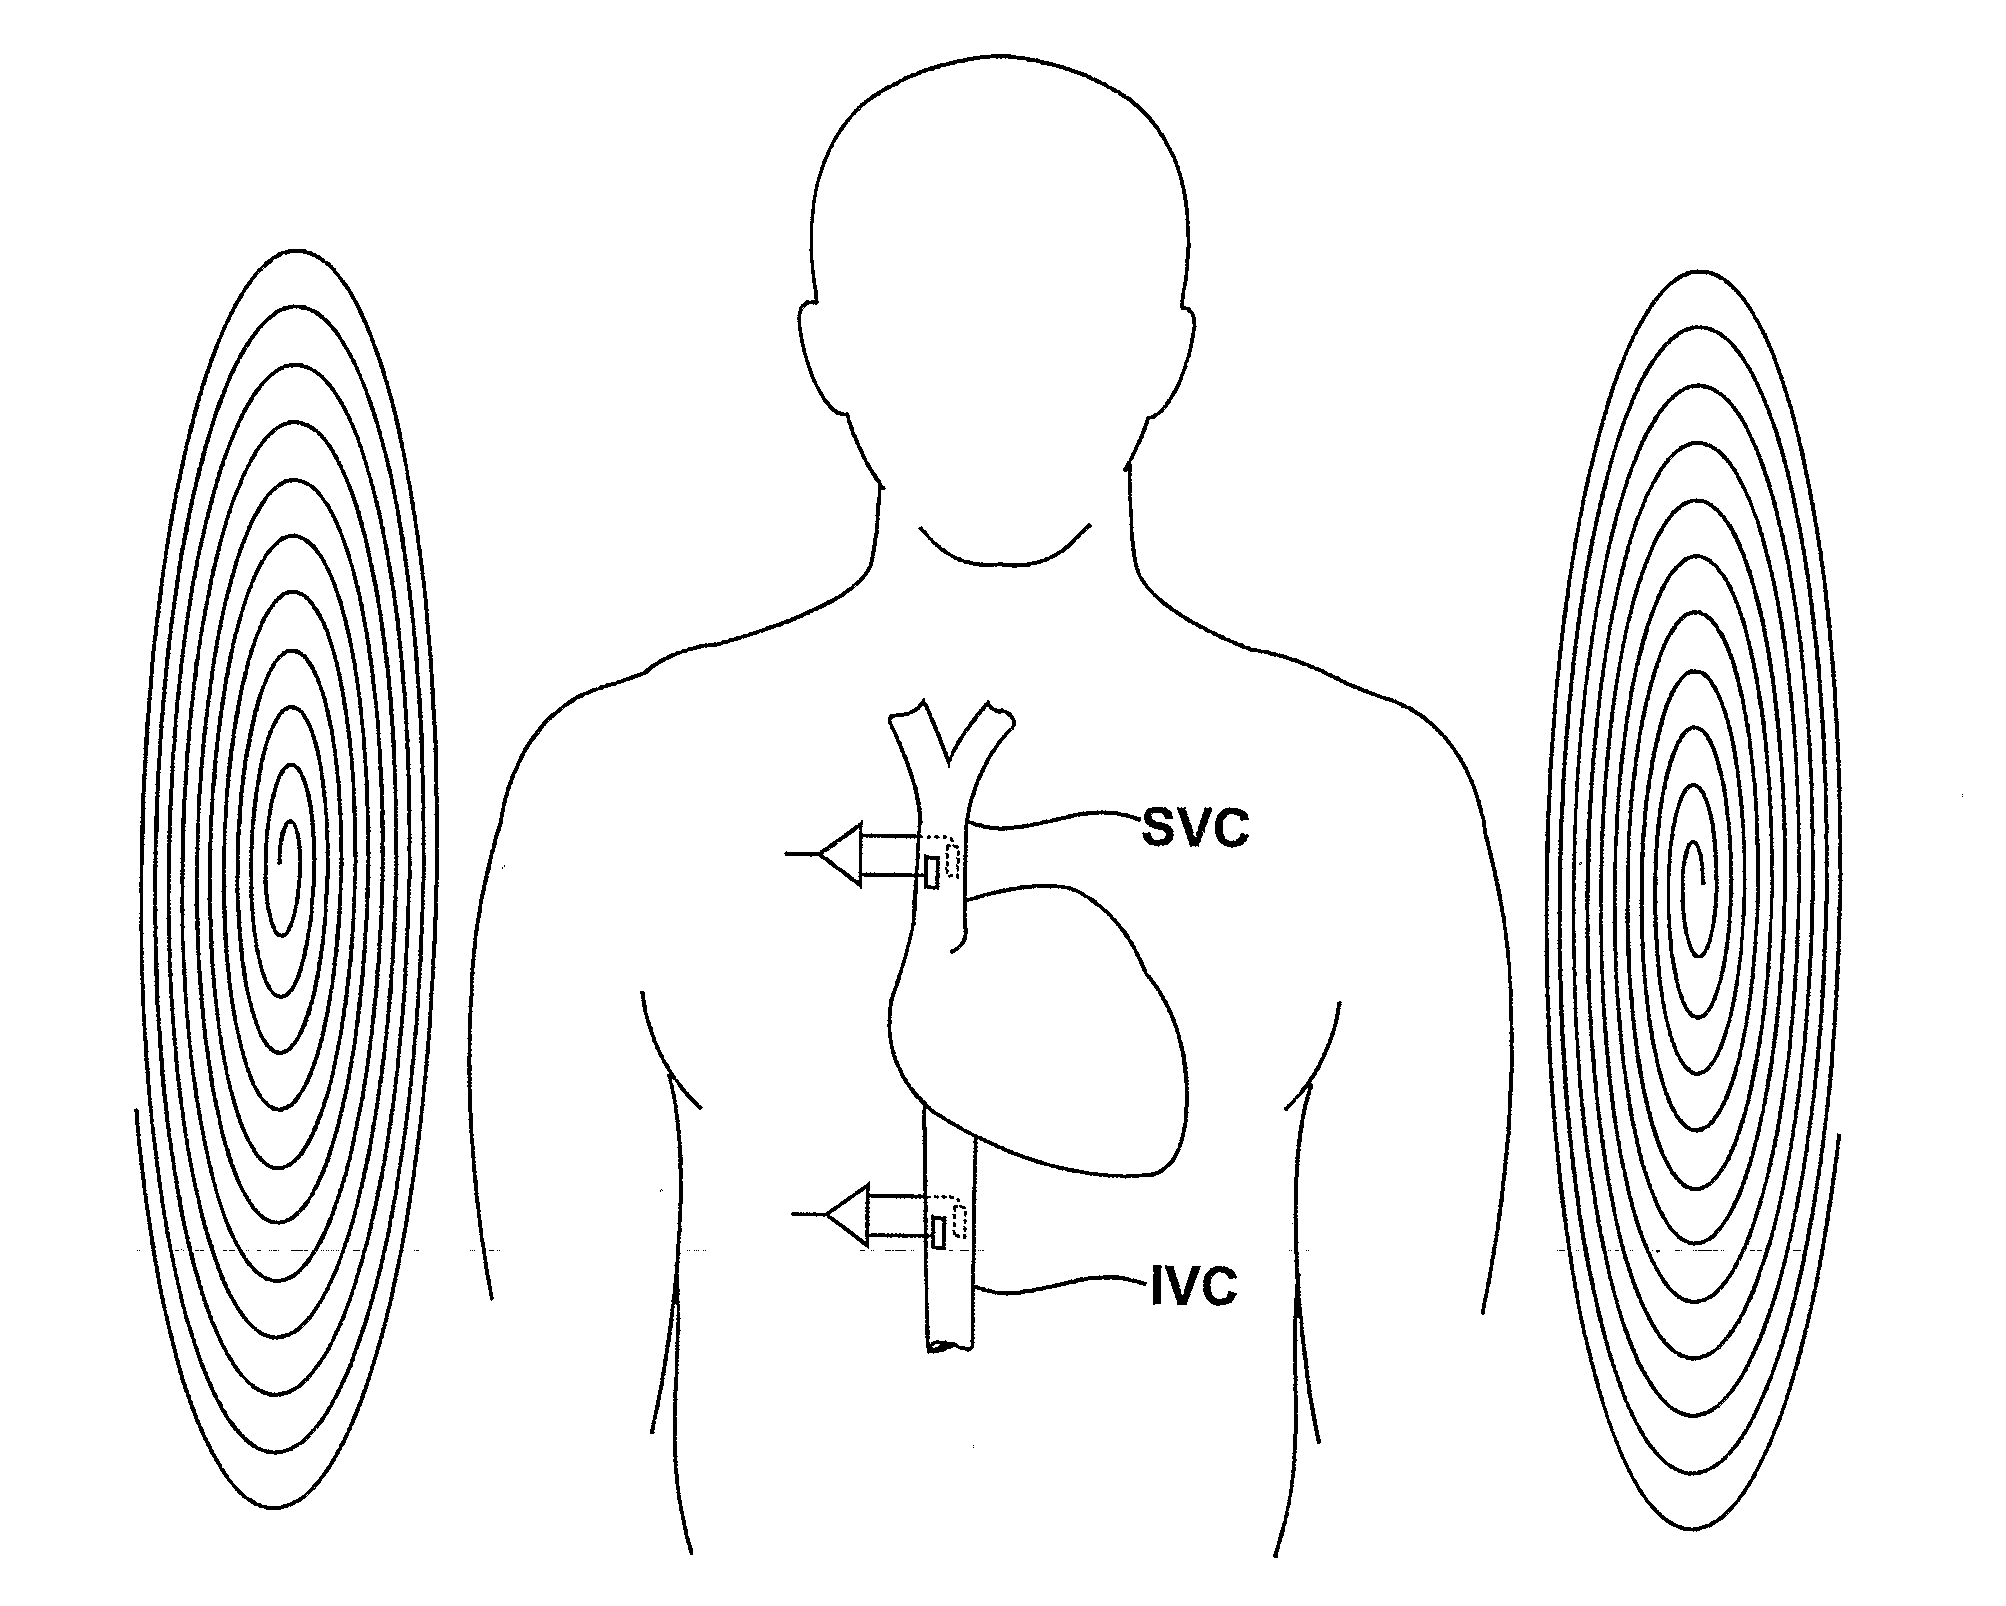 Medical Diagnostic and Treatment Platform Using Near-Field Wireless Communication of Information Within a Patient's Body